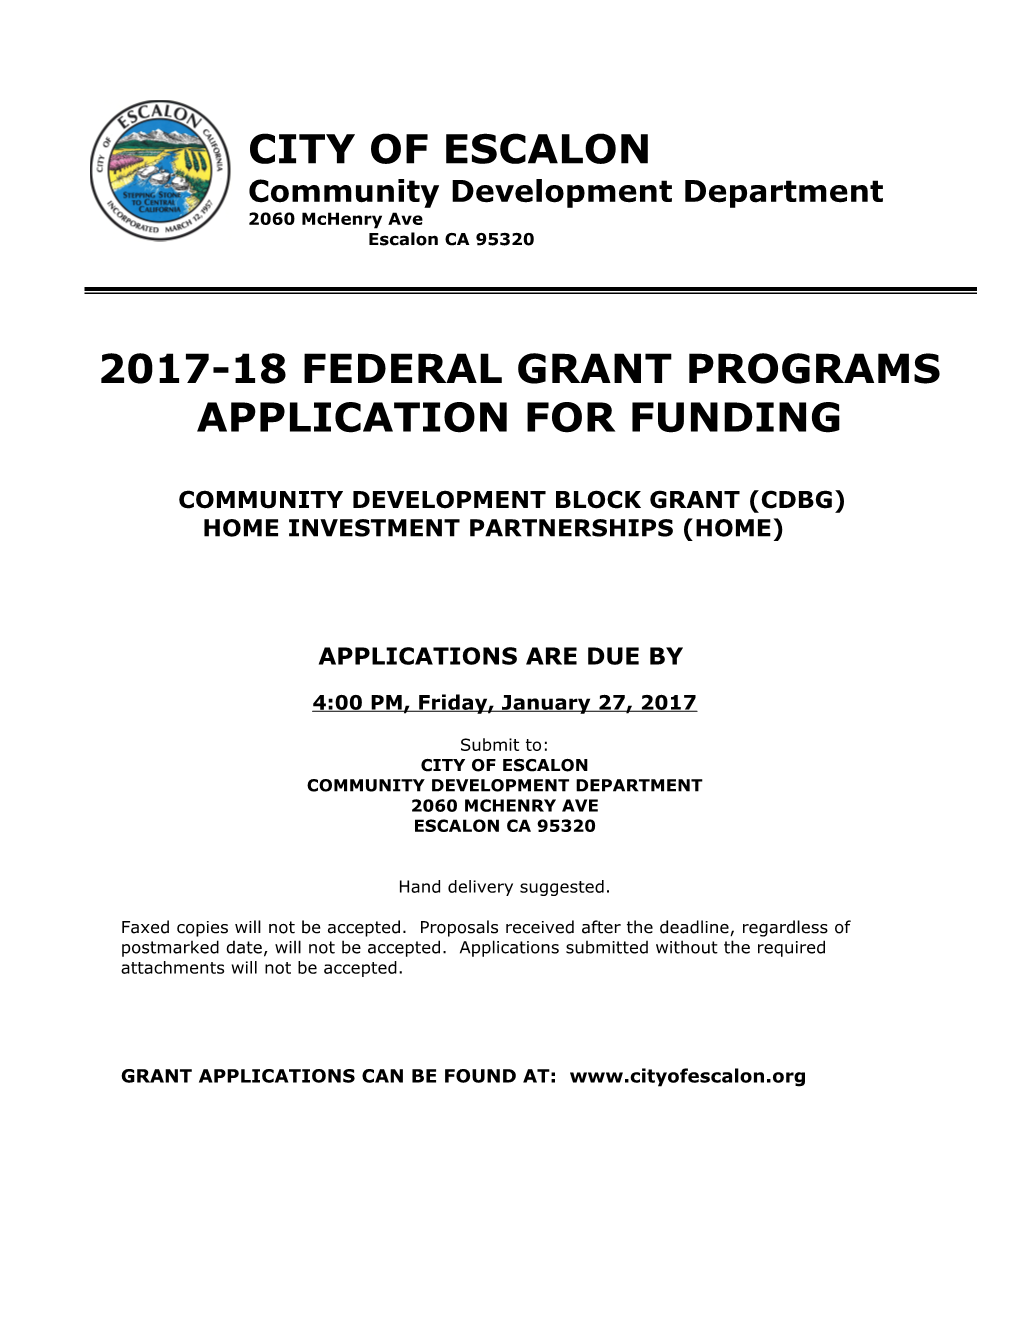 2017-18 Federal Grant Programs Application for Funding